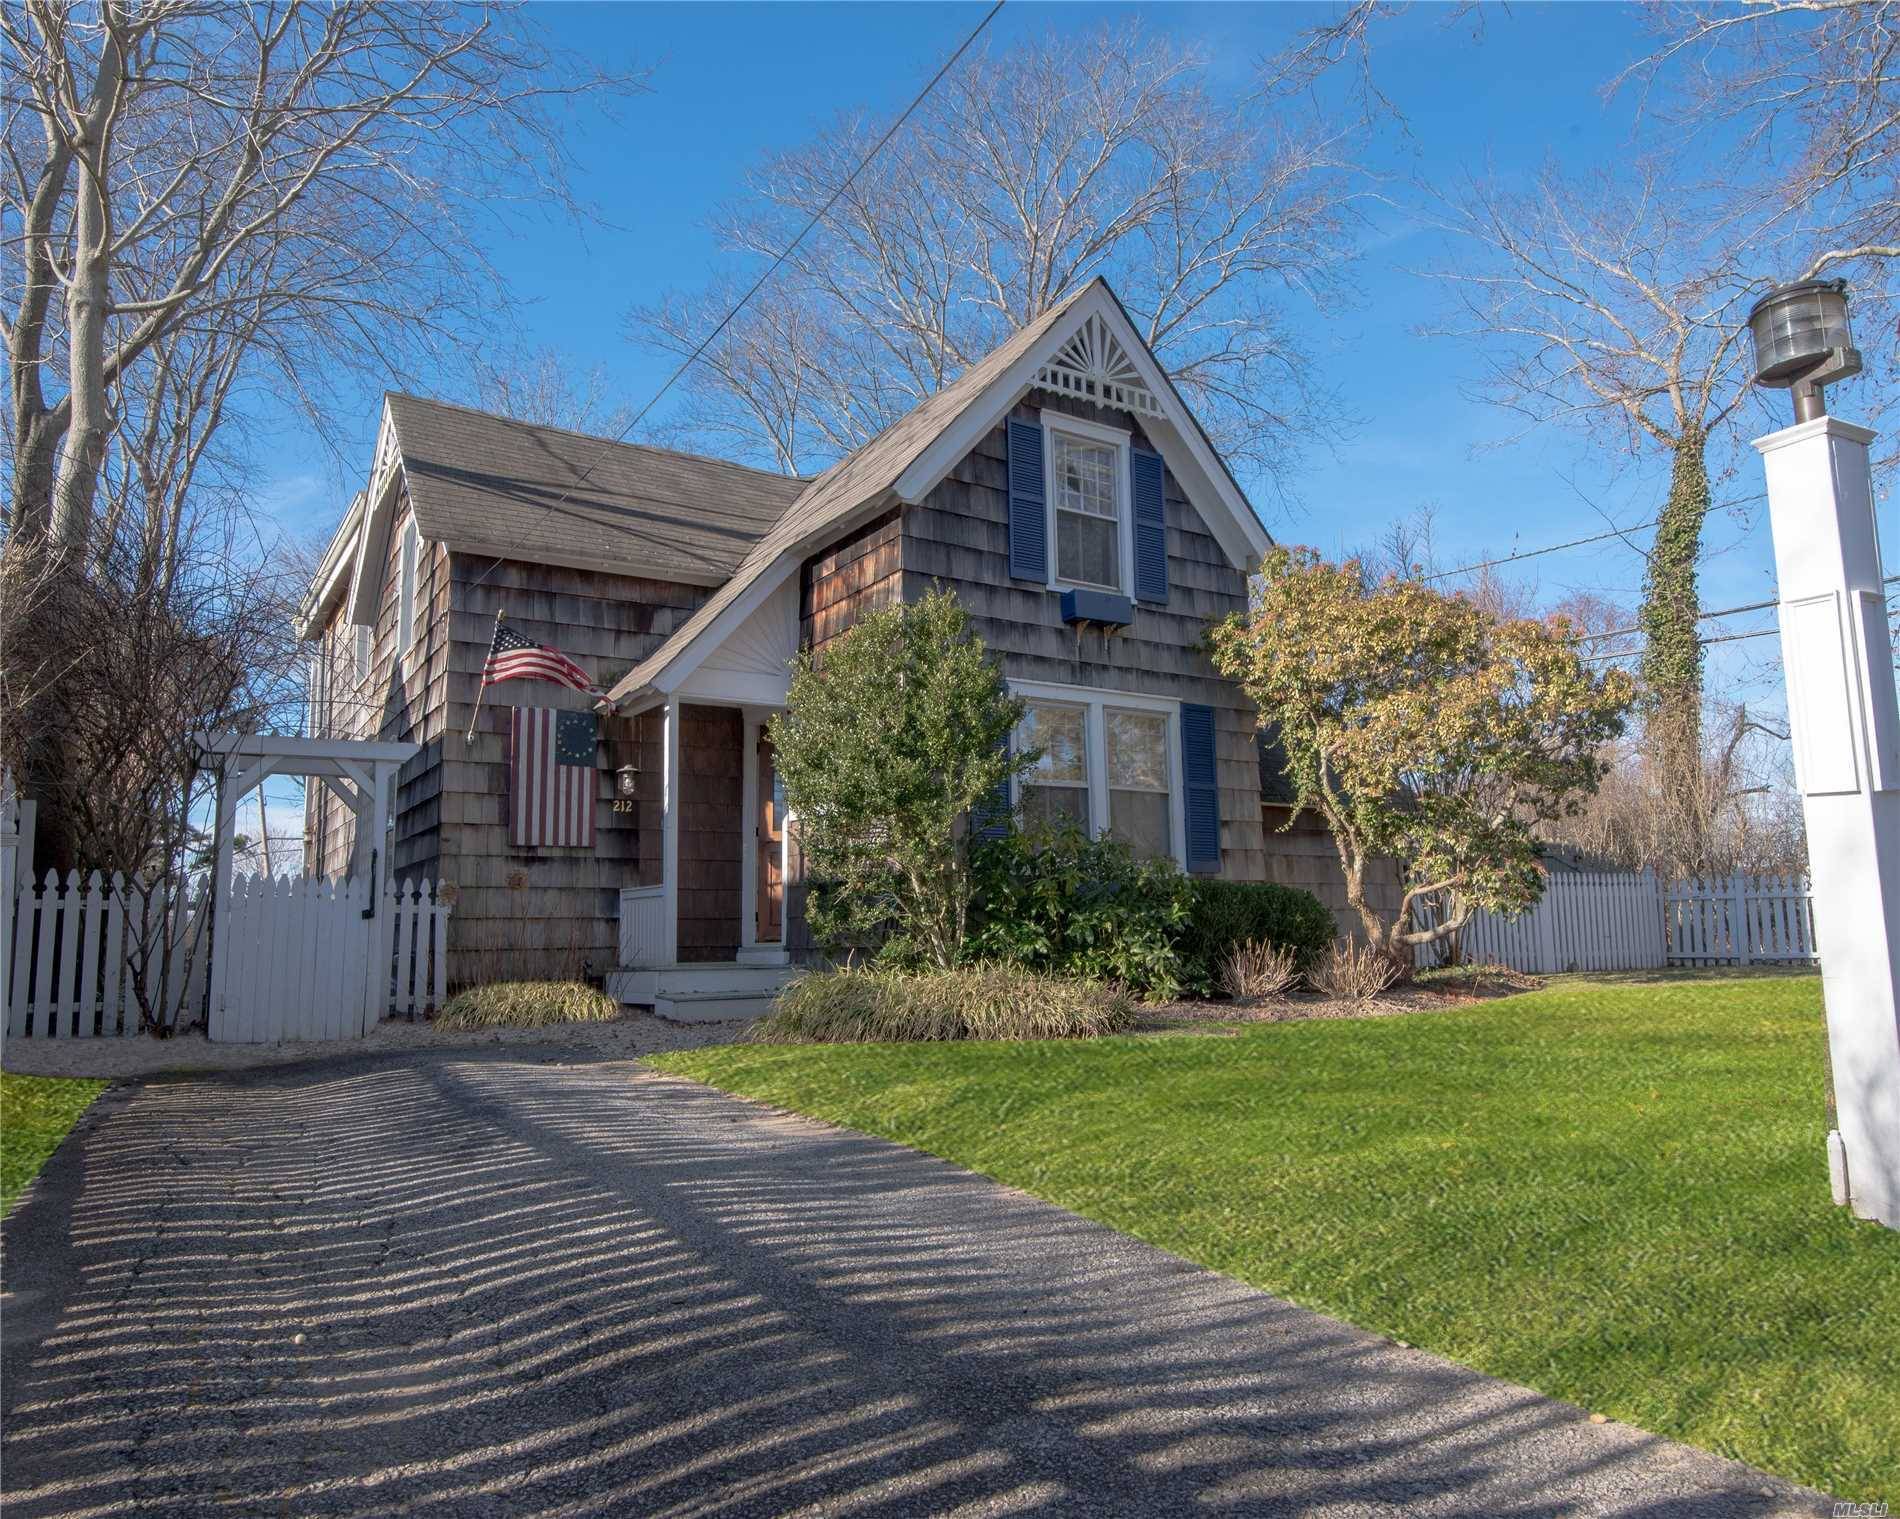 Built In The Early 1900'S, This Charming Home Was Featured In The Book, 